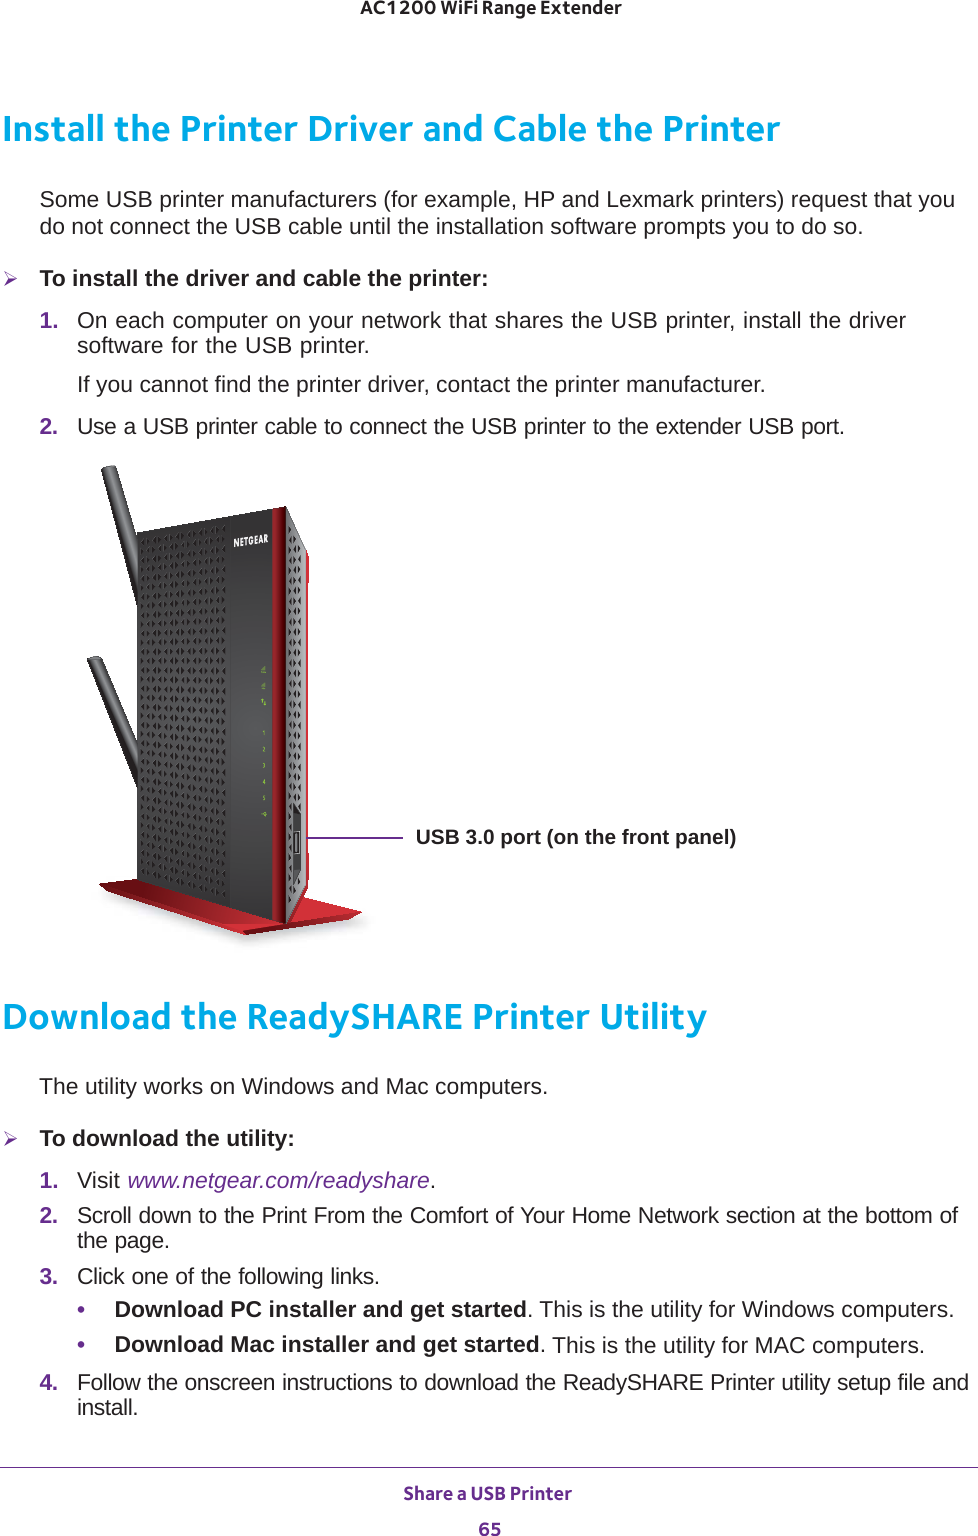 Share a USB Printer 65 AC1200 WiFi Range ExtenderInstall the Printer Driver and Cable the PrinterSome USB printer manufacturers (for example, HP and Lexmark printers) request that you do not connect the USB cable until the installation software prompts you to do so.To install the driver and cable the printer:1.  On each computer on your network that shares the USB printer, install the driver software for the USB printer.If you cannot find the printer driver, contact the printer manufacturer.2.  Use a USB printer cable to connect the USB printer to the extender USB port.USB 3.0 port (on the front panel)Download the ReadySHARE Printer UtilityThe utility works on Windows and Mac computers.To download the utility:1.  Visit www.netgear.com/readyshare.2.  Scroll down to the Print From the Comfort of Your Home Network section at the bottom of the page.3.  Click one of the following links.•Download PC installer and get started. This is the utility for Windows computers.•Download Mac installer and get started. This is the utility for MAC computers.4.  Follow the onscreen instructions to download the ReadySHARE Printer utility setup file and install.